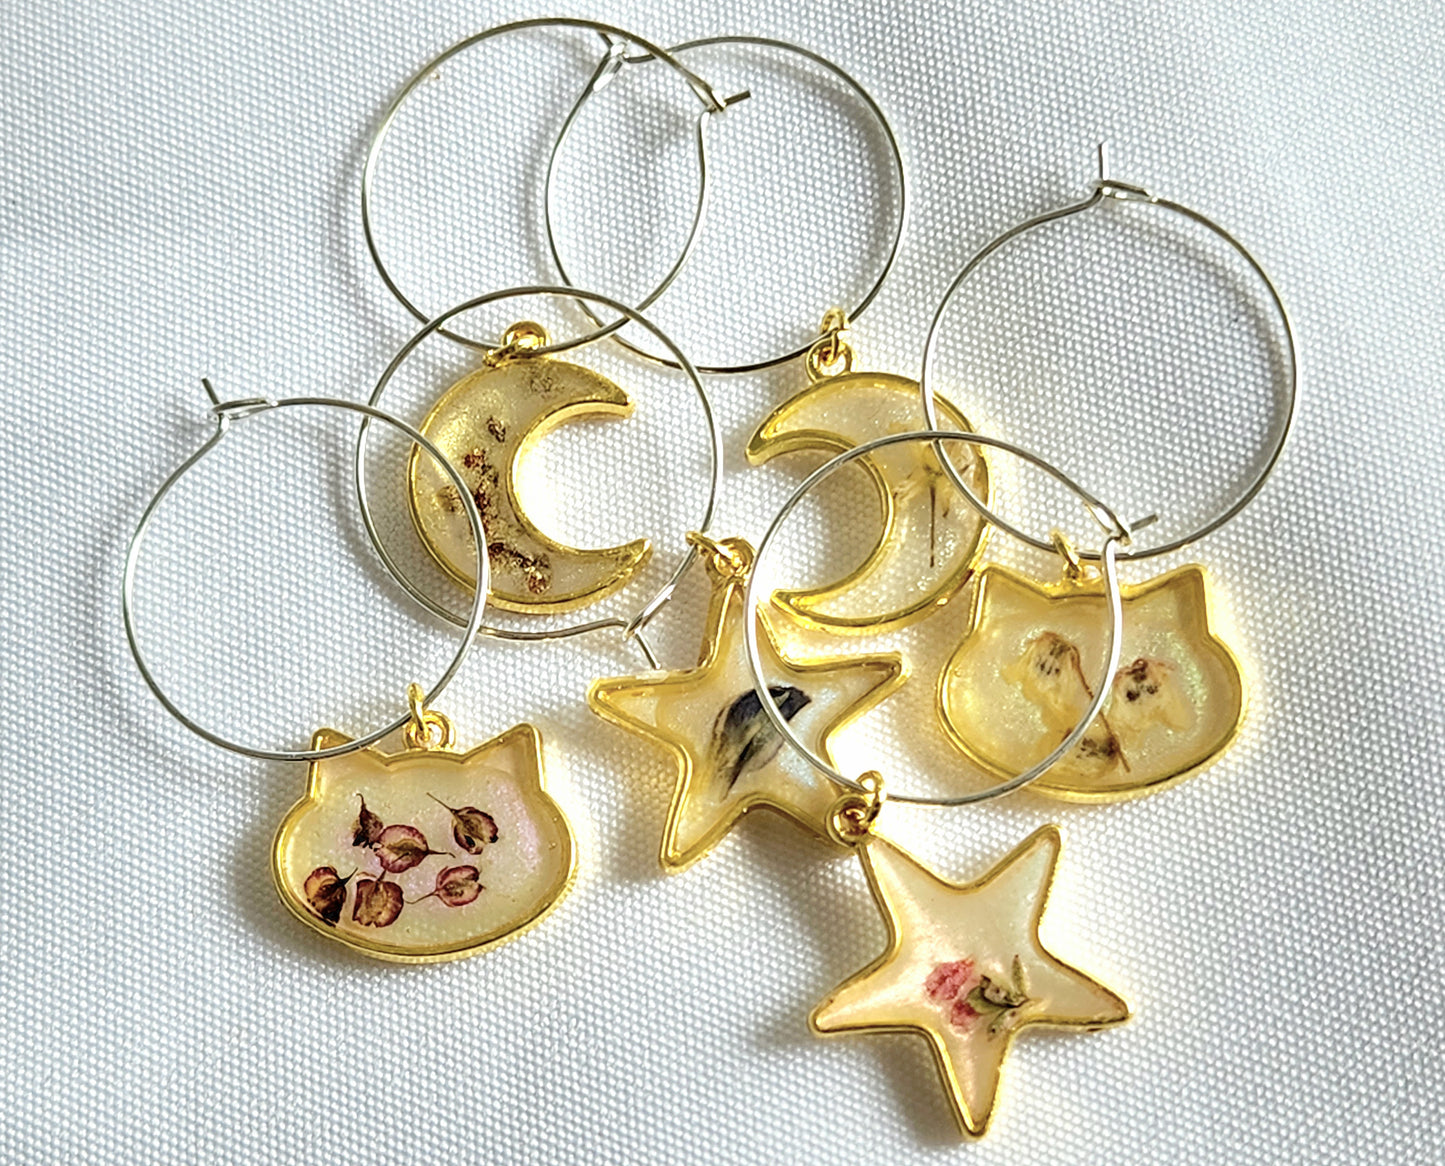 Wine Charms - 6 different charms!